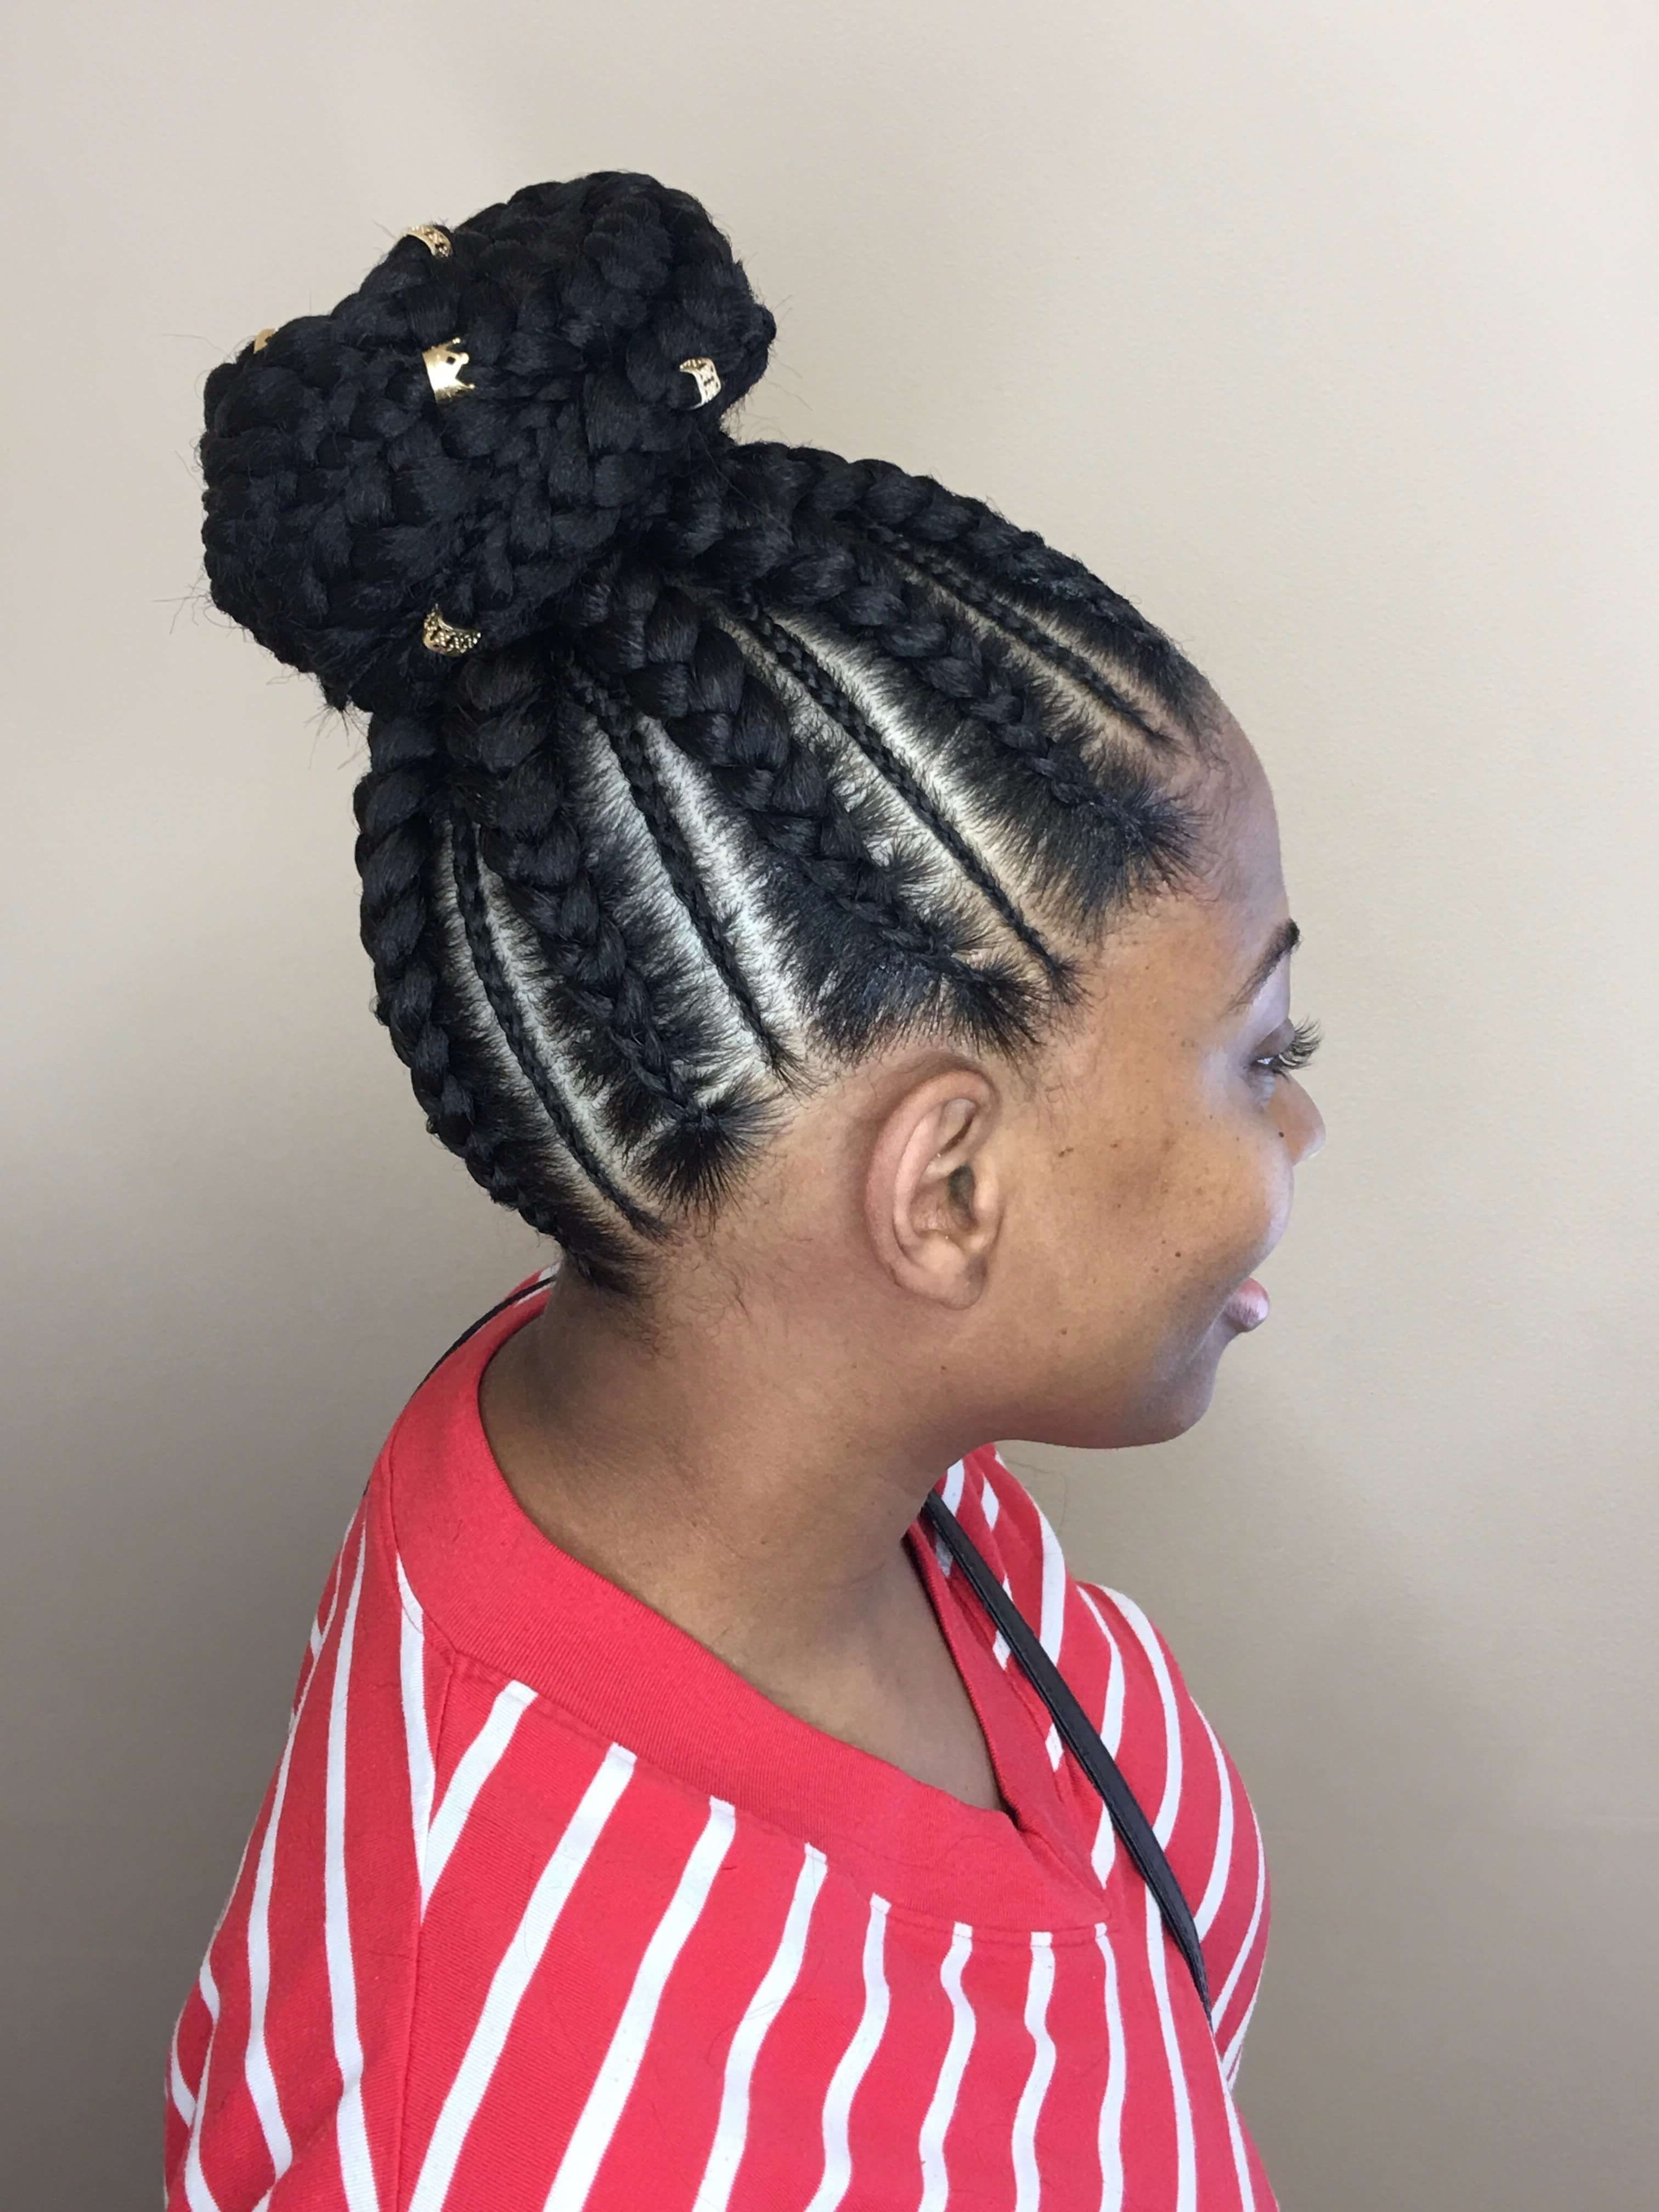 50 Natural Goddess Braids To Bless Ethnic Hair In 2018 Regarding Recent Braid And Bun Ponytail Hairstyles (View 11 of 20)